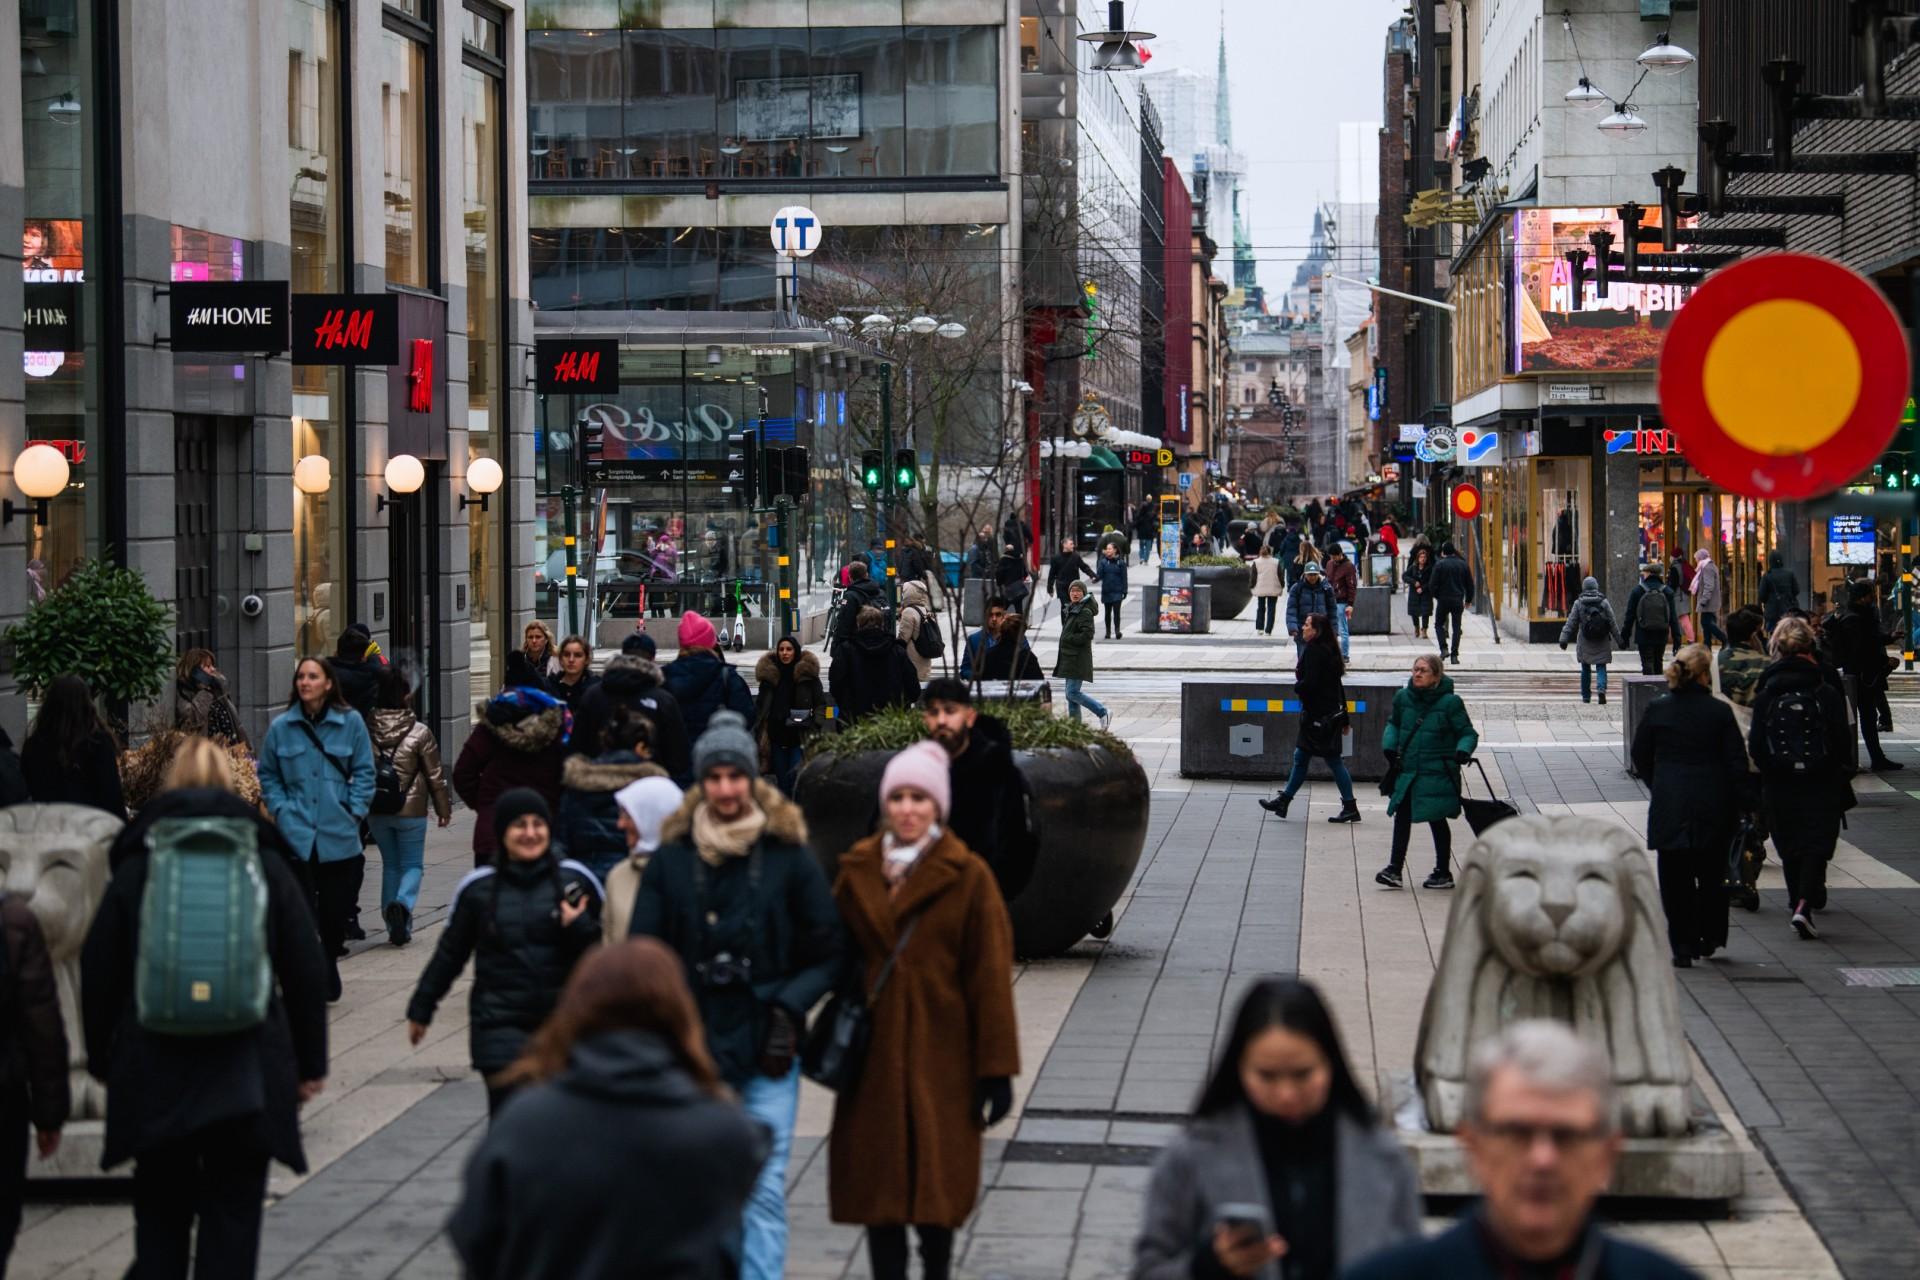 People visit one of Stockholm's busiest shopping streets on Feb 4, during the ongoing Covid-19 pandemic. Photo: AFP